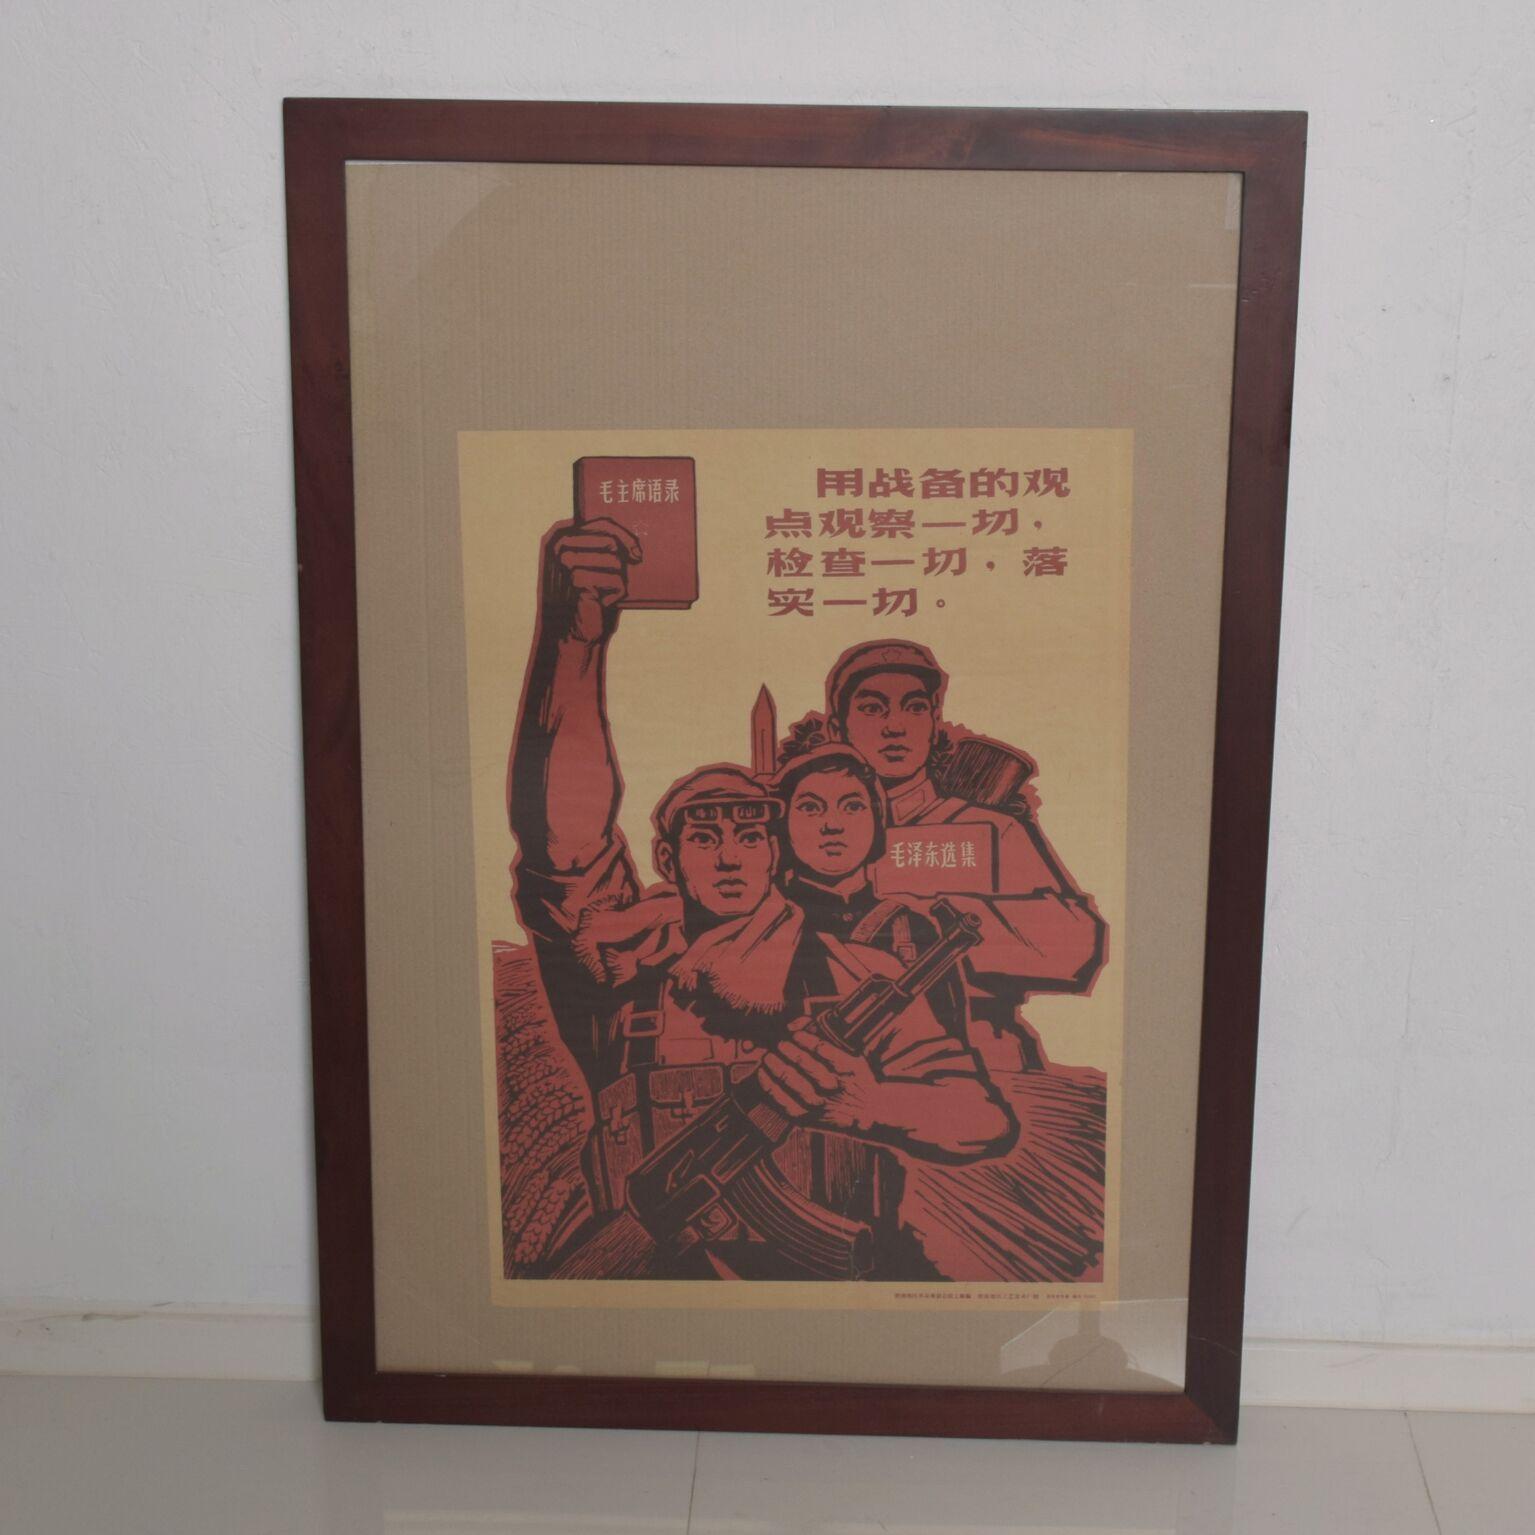 For your consideration: Mao Chinese Communist Party Protest Propaganda Art, poster in red black lithograph, framed with glass.

Dimensions: 30 1/4